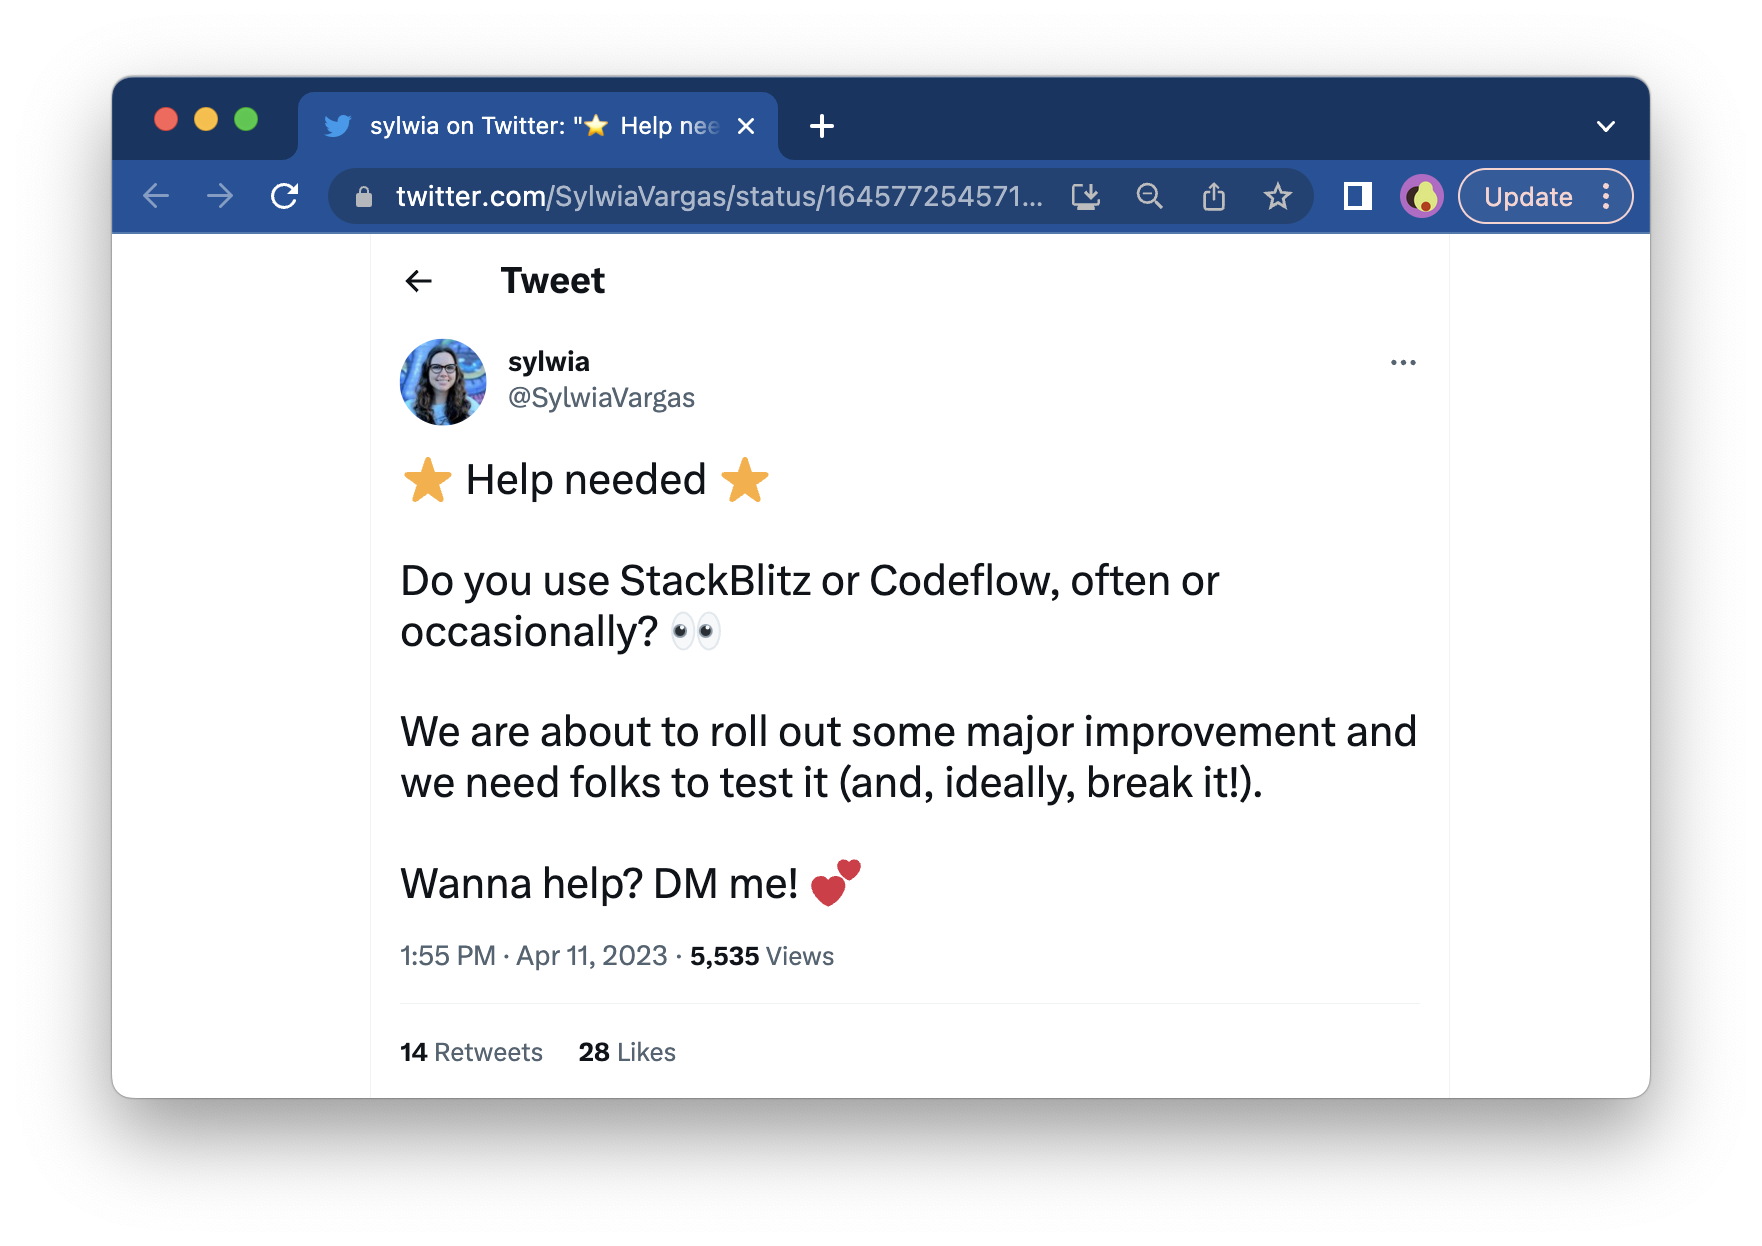 Tweet that reads: Help needed Do you use StackBlitz or Codeflow, often or occasionally? We are about to roll out some major improvement and we need folks to test it (and, ideally, break it!). Wanna help? DM me!